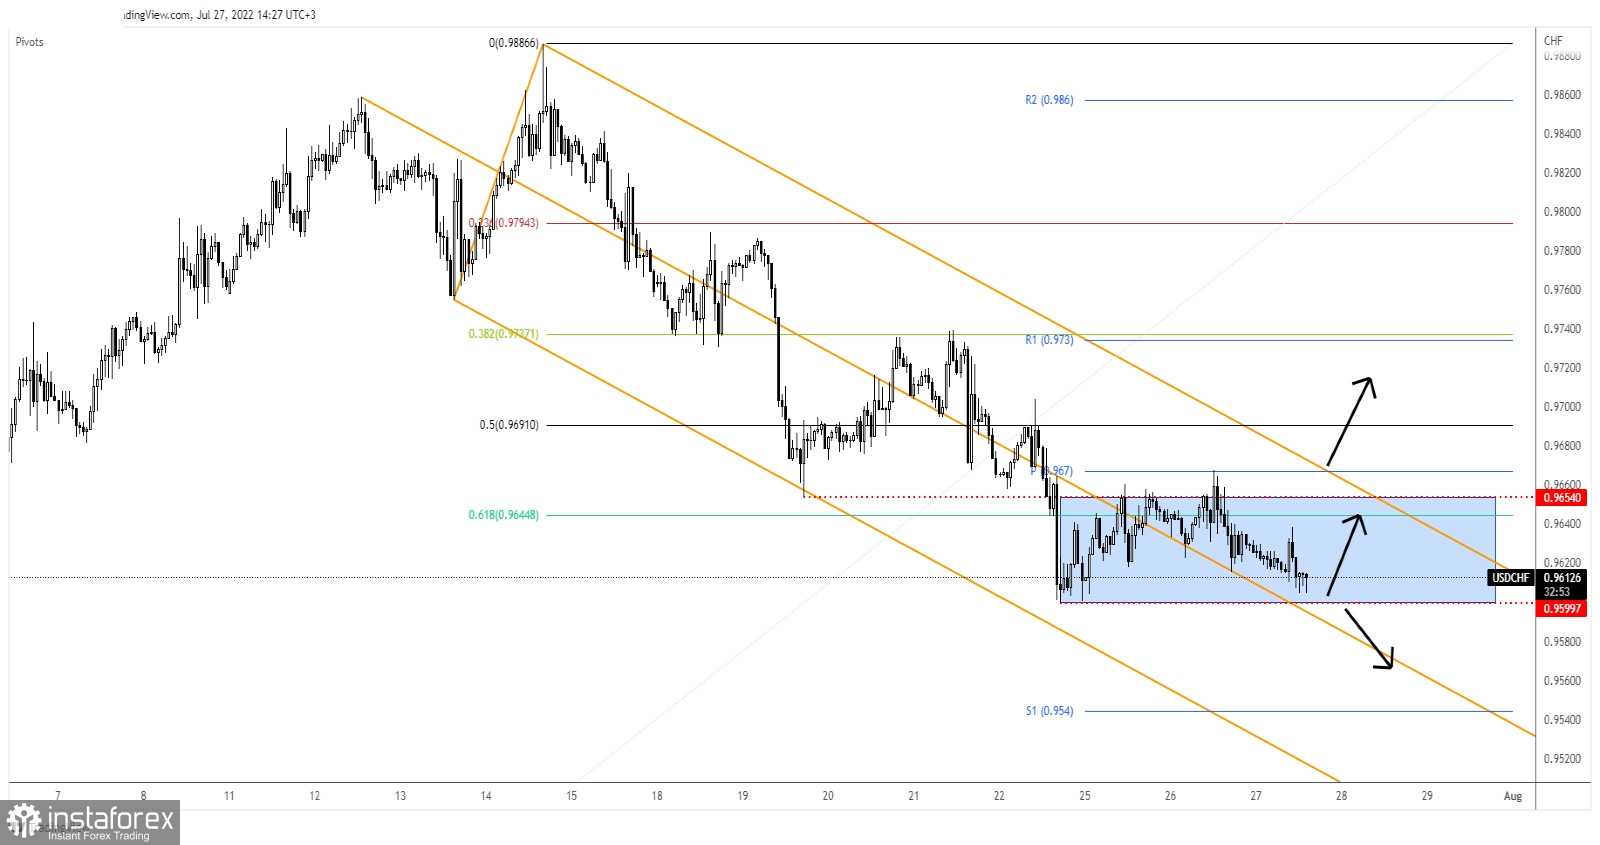 USD/CHF to exit its range soon?